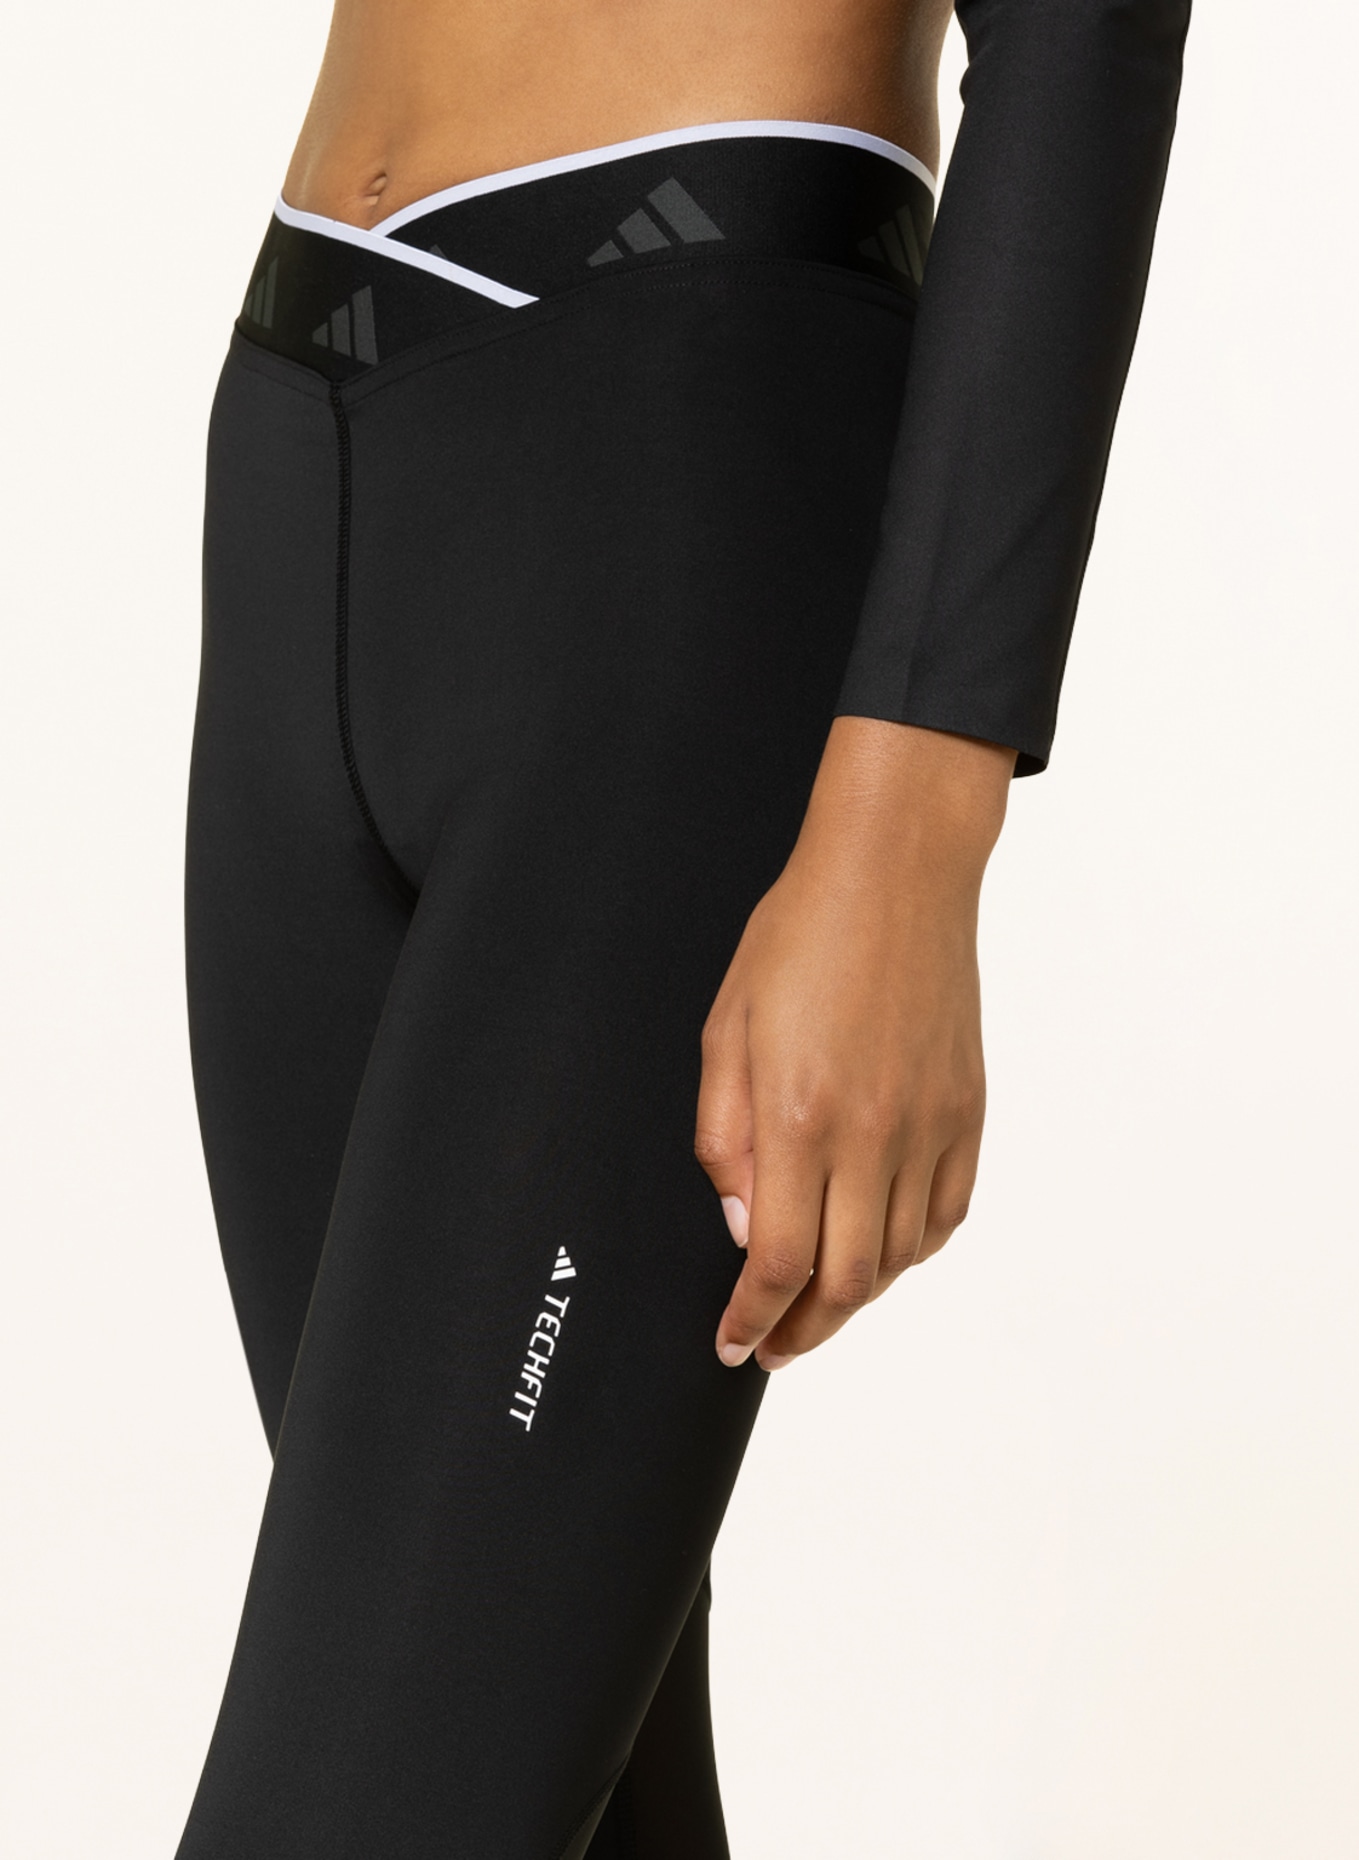 Online offer in Adidas Techfit Tights